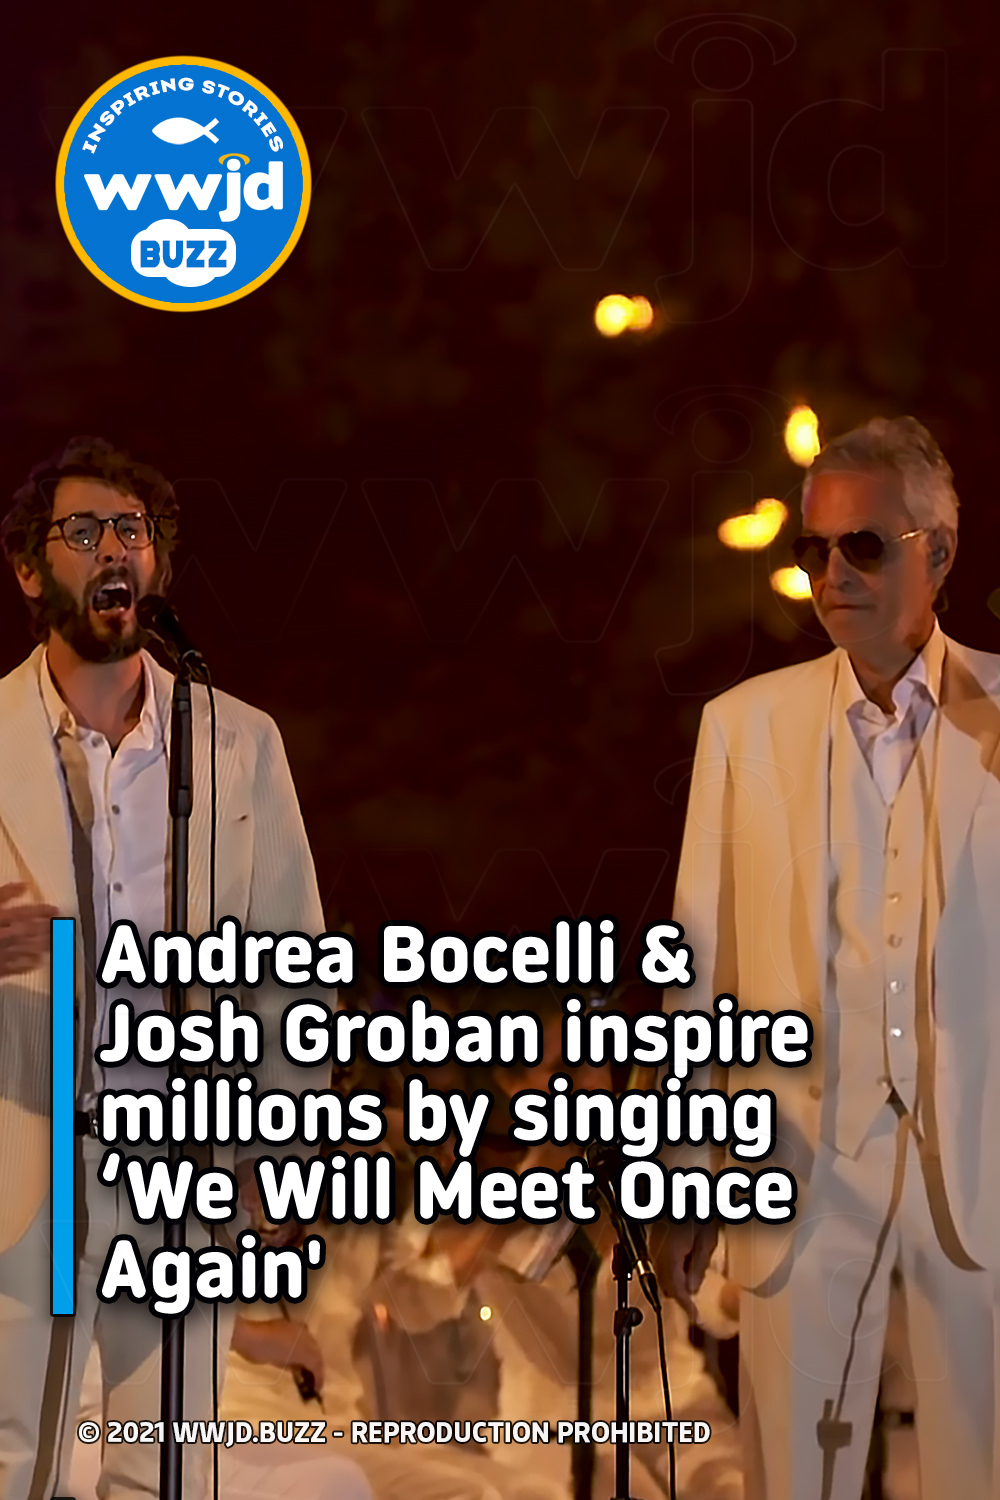 Andrea Bocelli & Josh Groban inspire millions by singing ‘We Will Meet Once Again\'